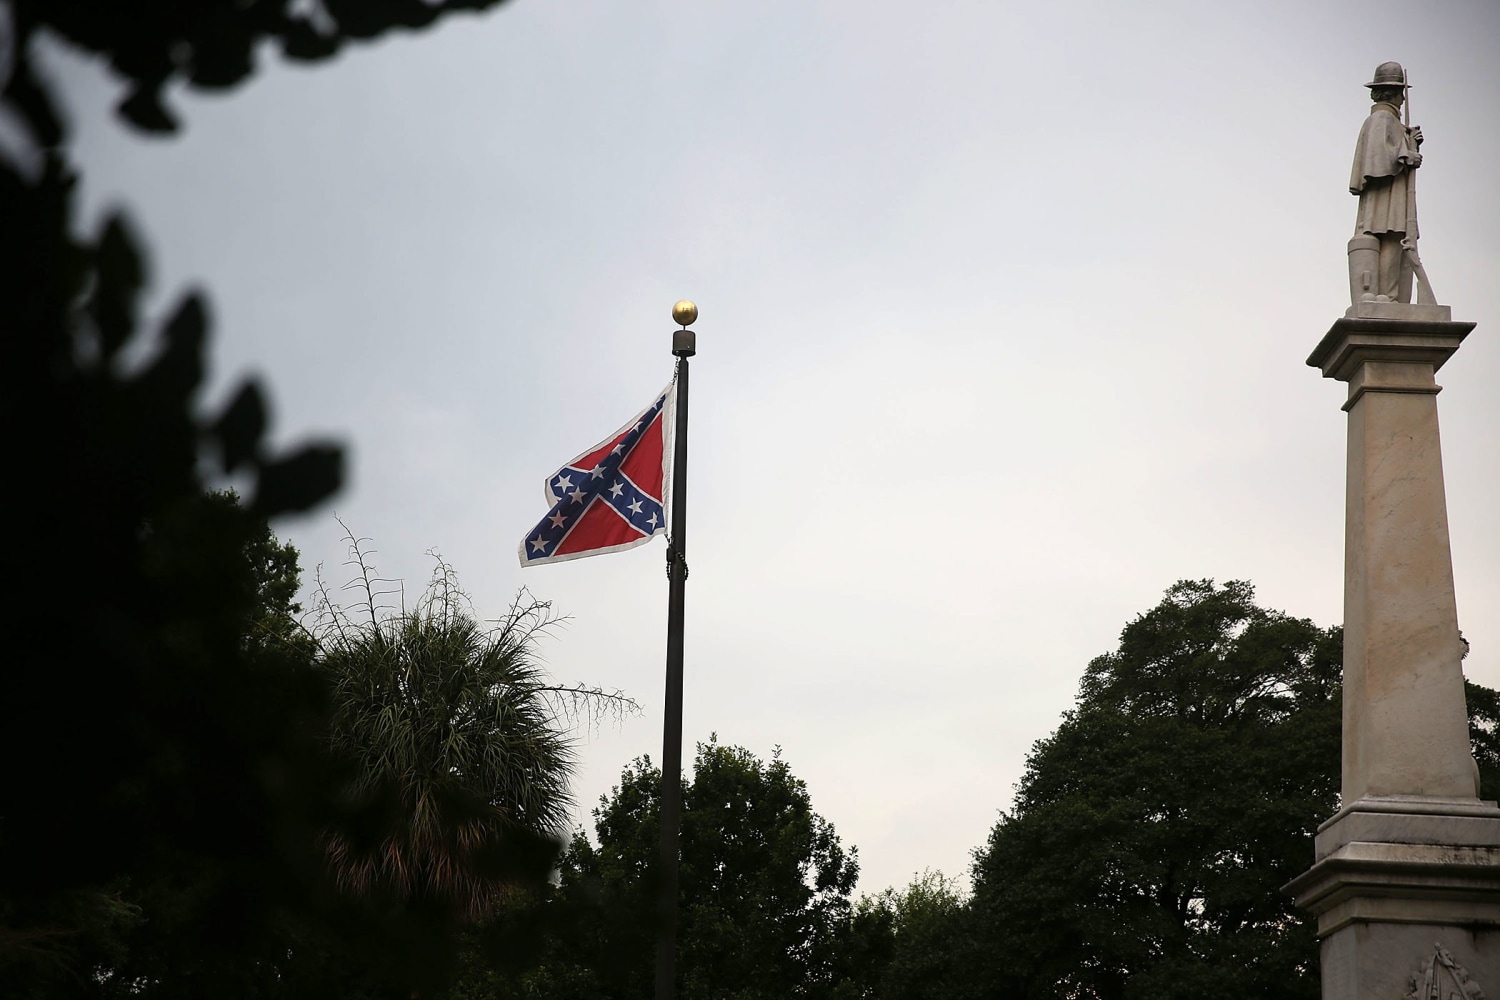 Why is the Confederate flag so offensive?